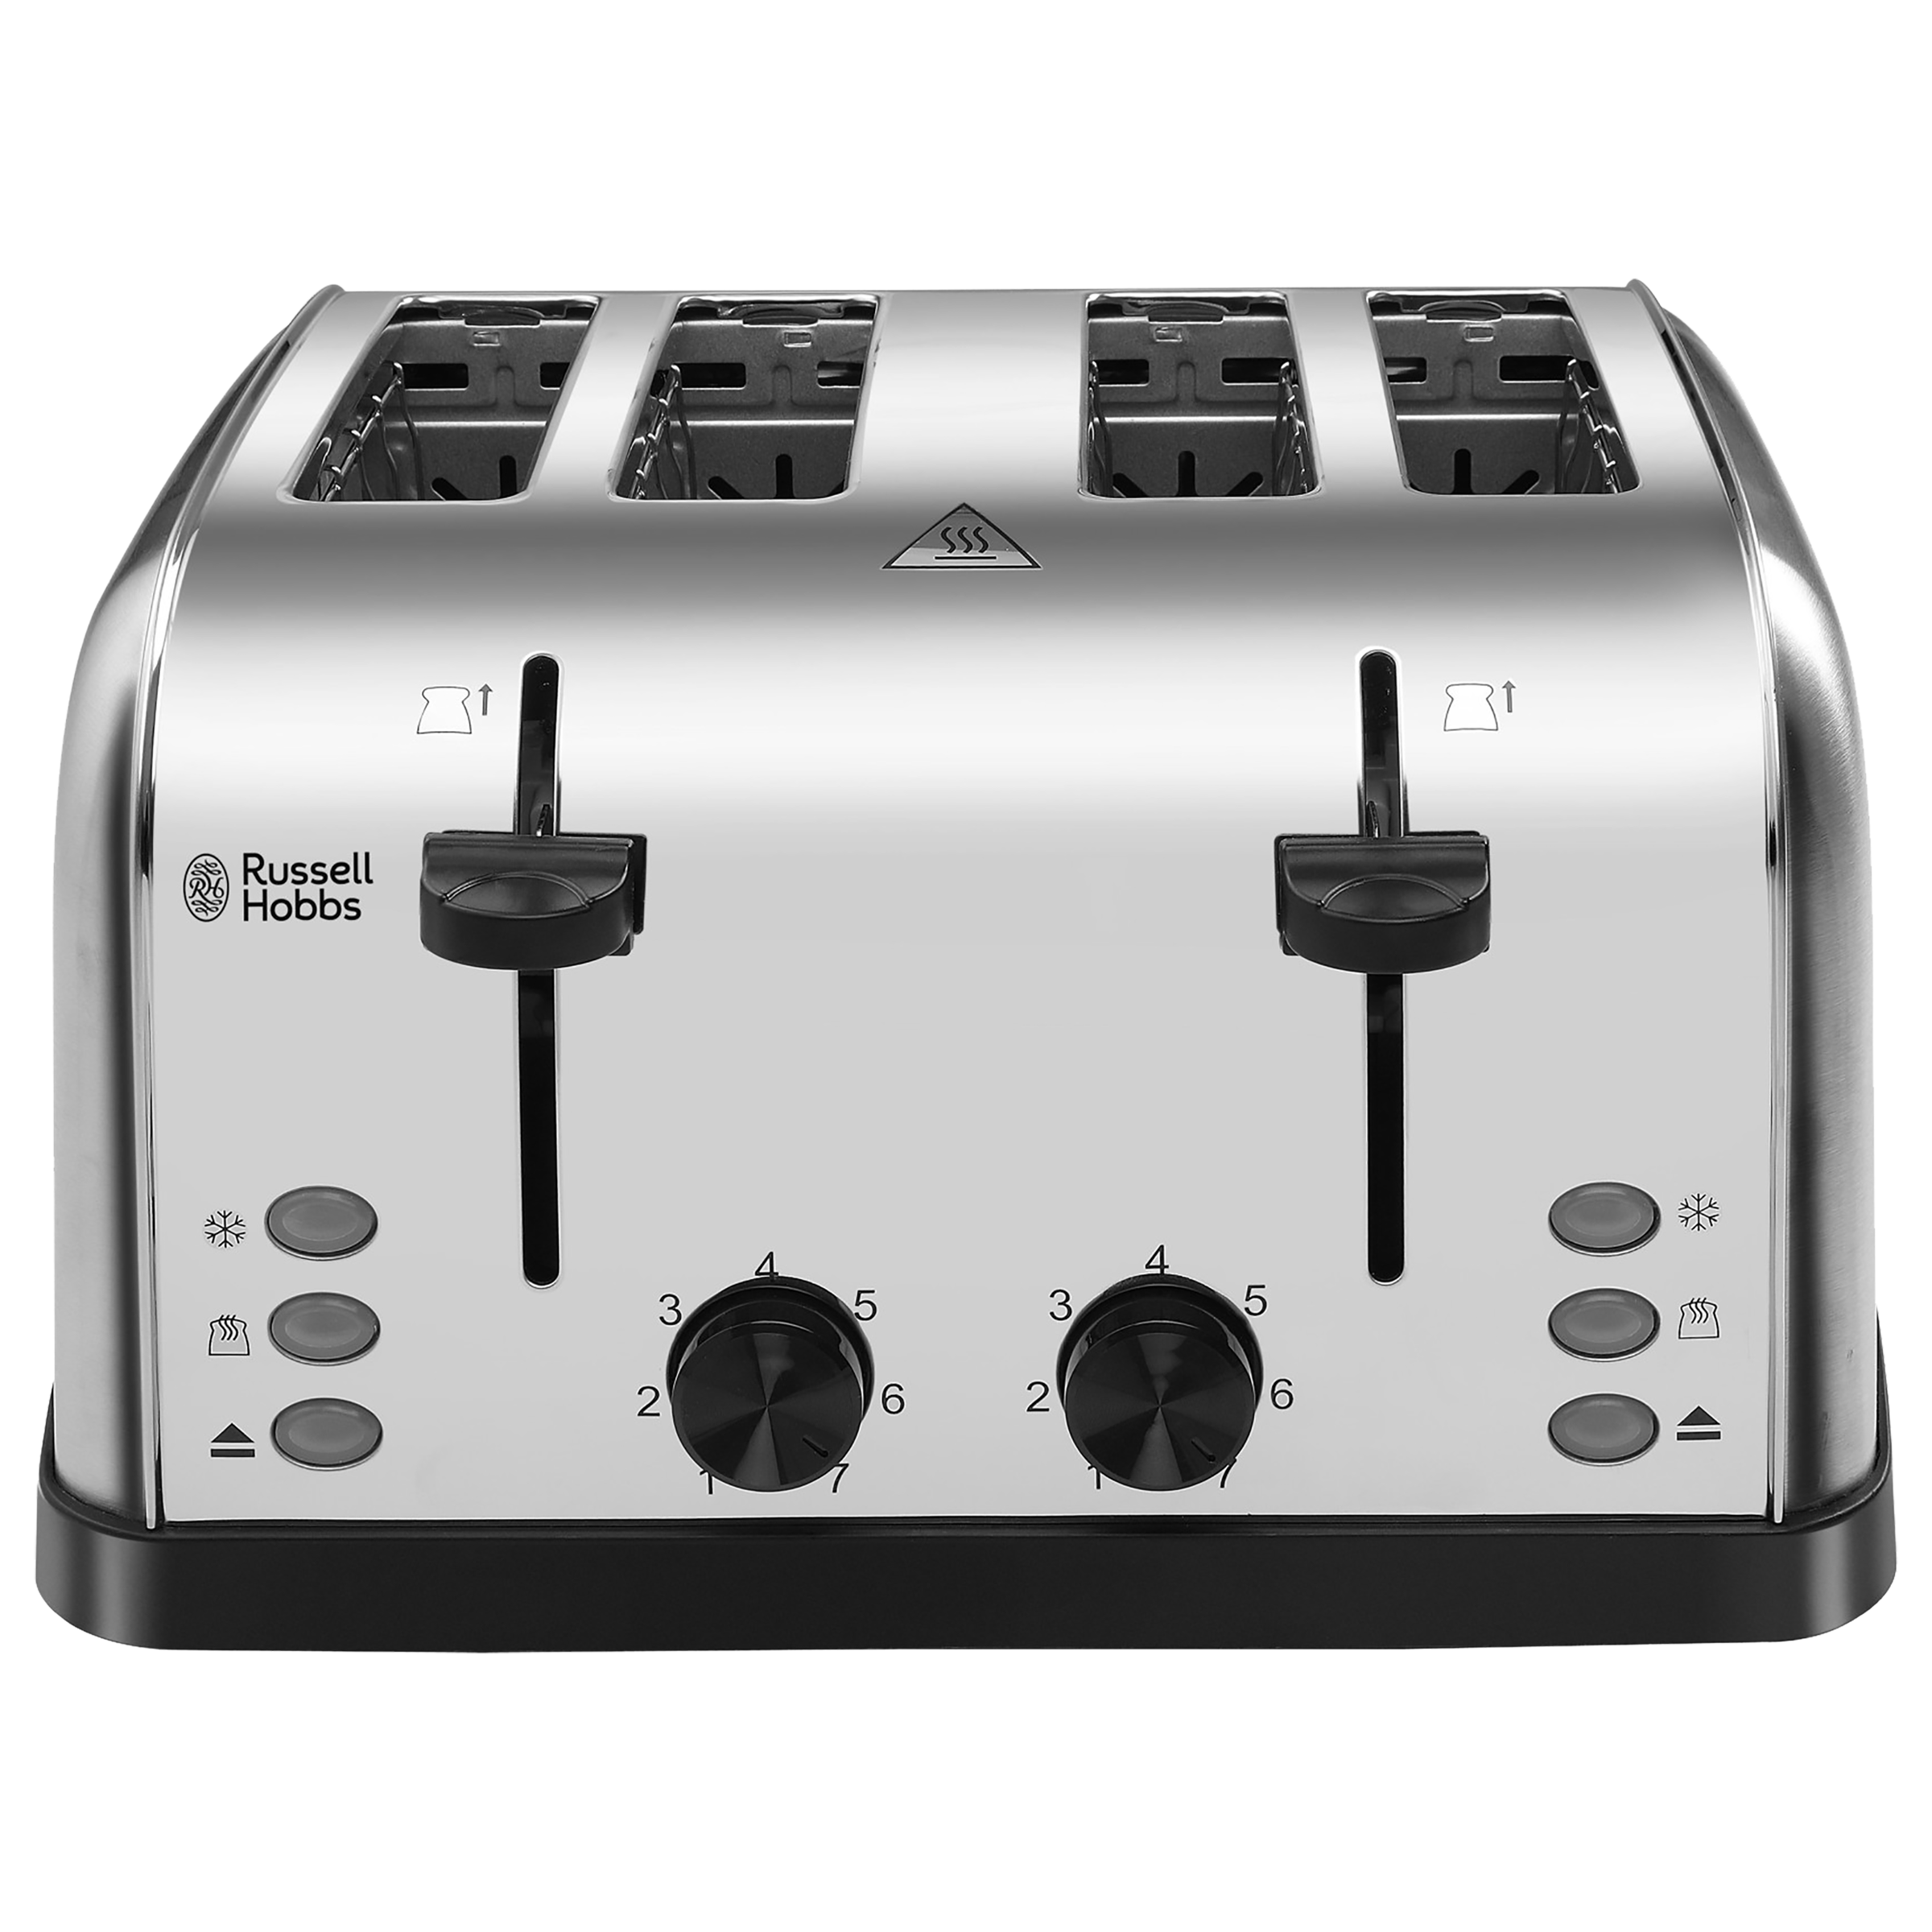 Russell Hobbs 18790 1500 Watts 4 Slice Automatic Pop-Up Toaster (Removable Crumb Tray, Silver)_1